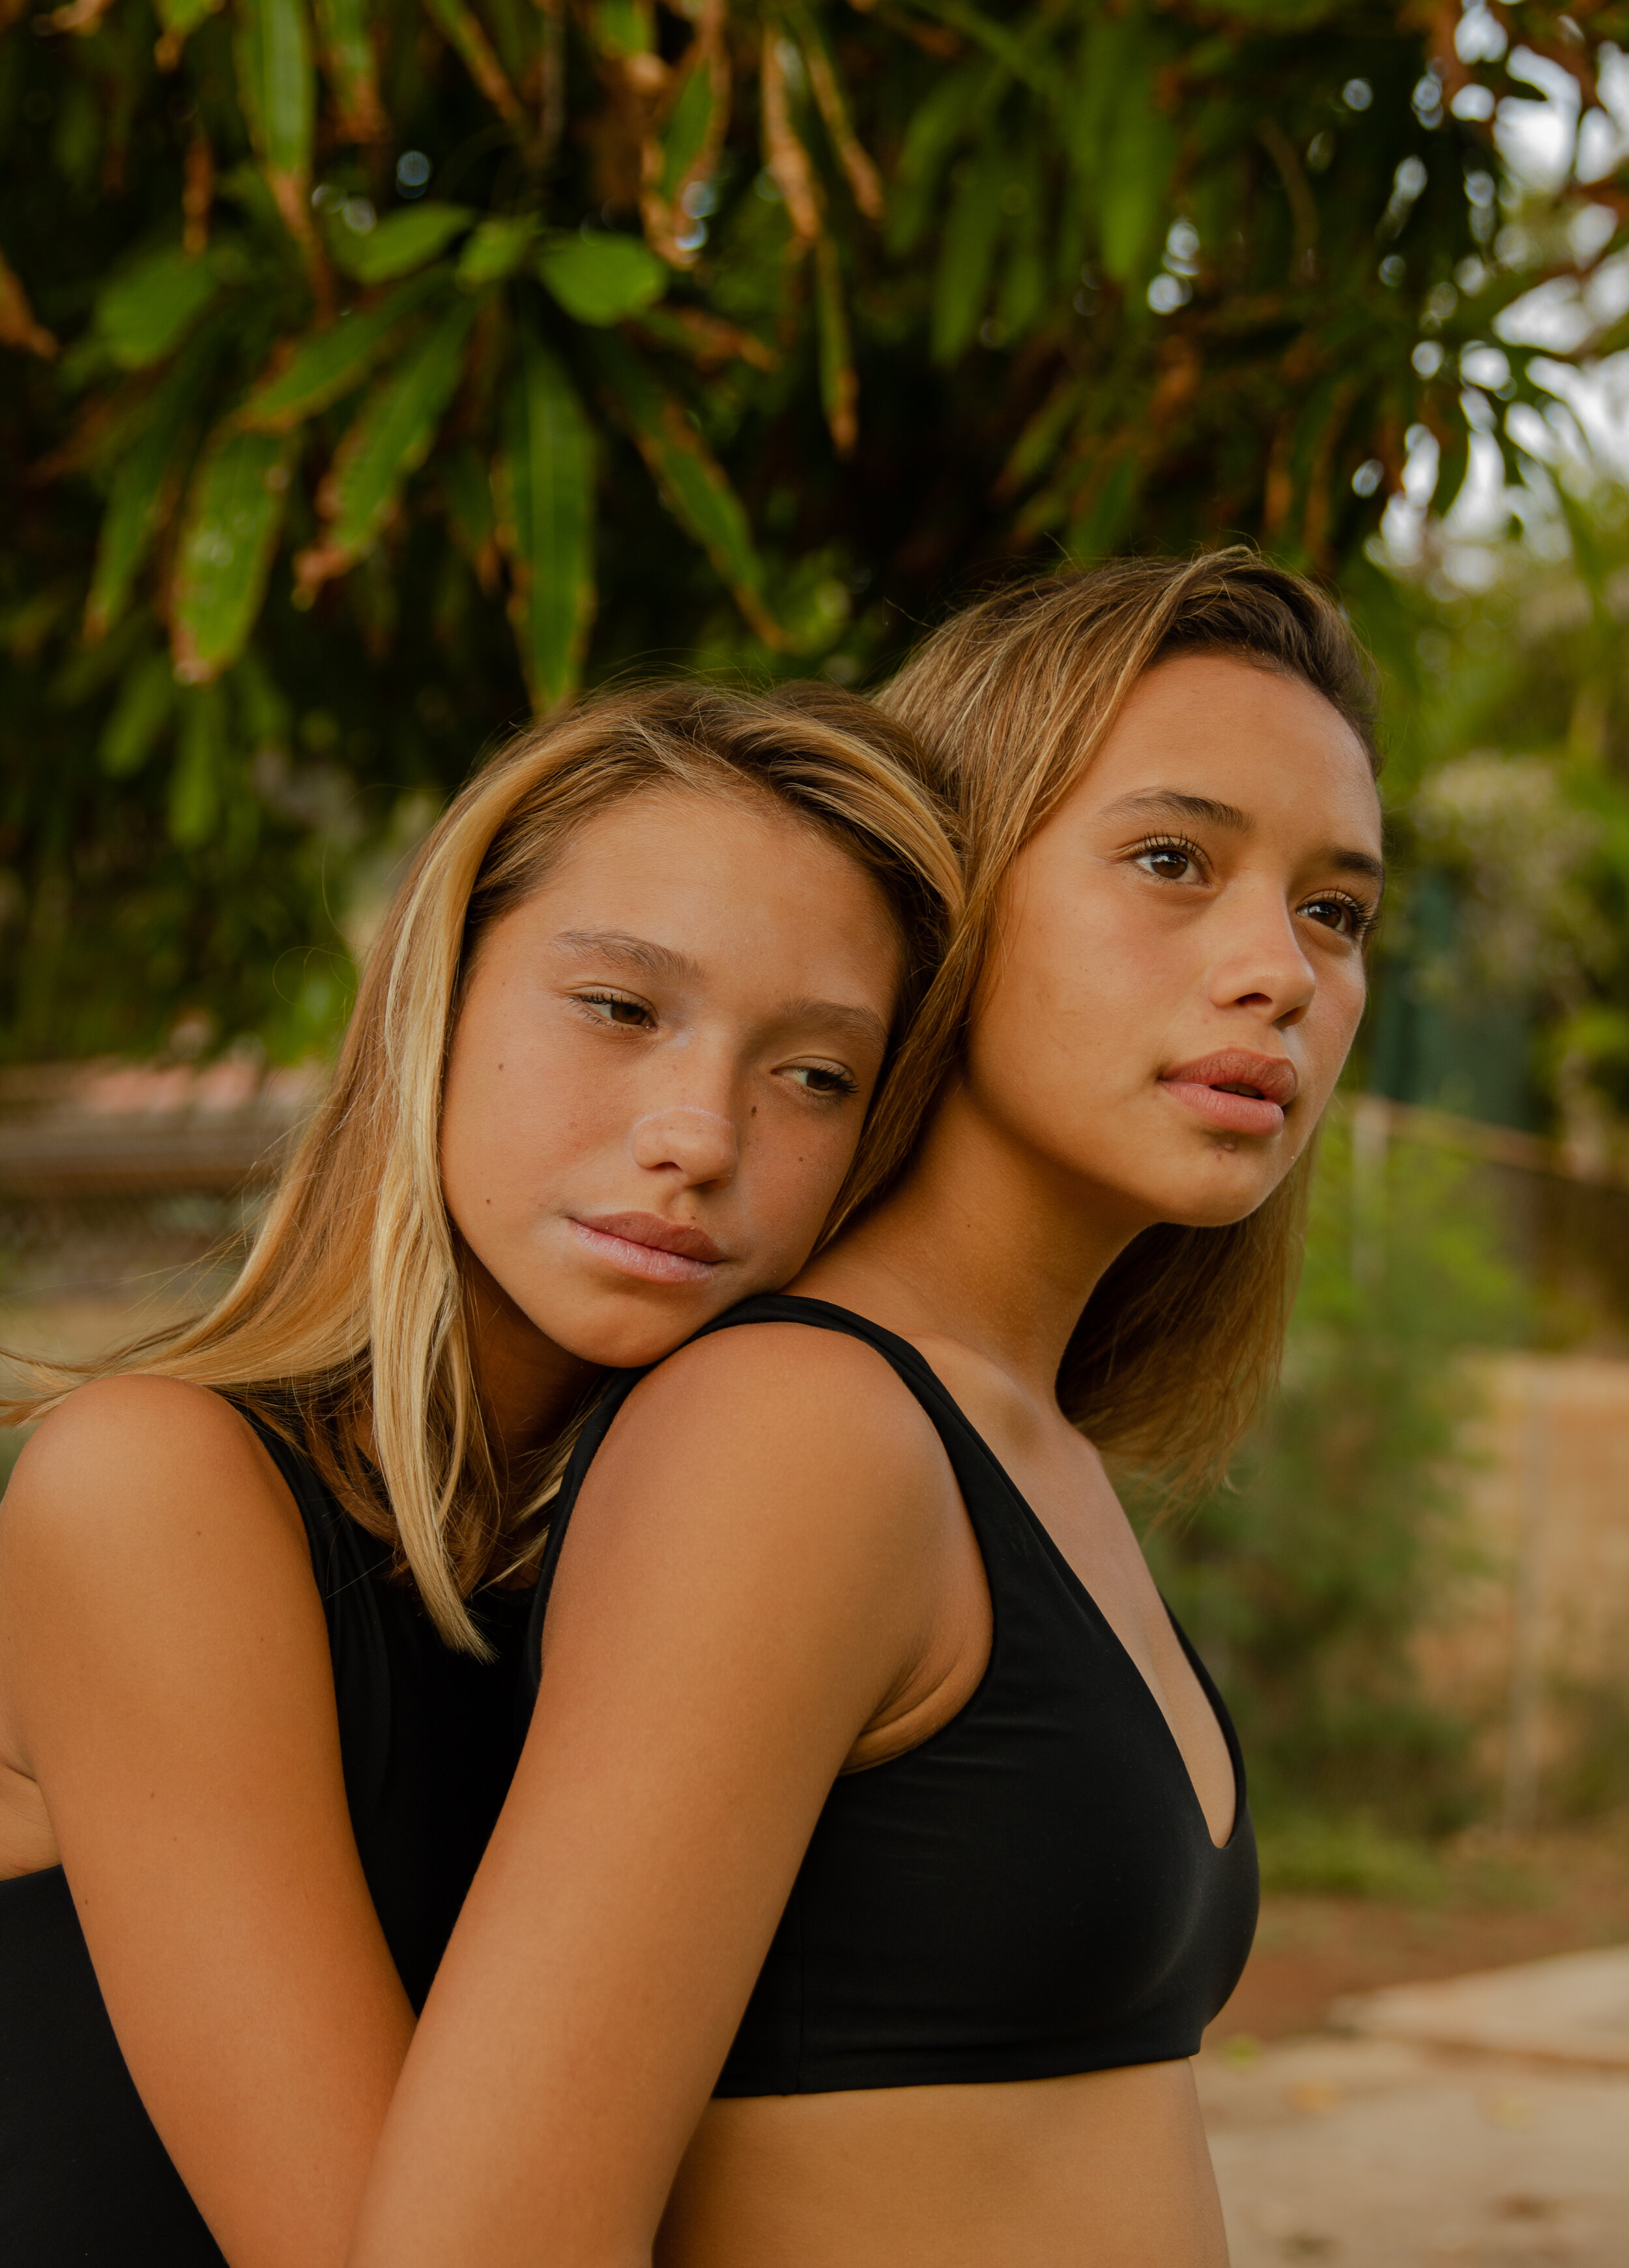  A project inspired by daily trips to Waikiki where I befriended a squad of pro teenage long-boarders and began documenting these young female surfers. 